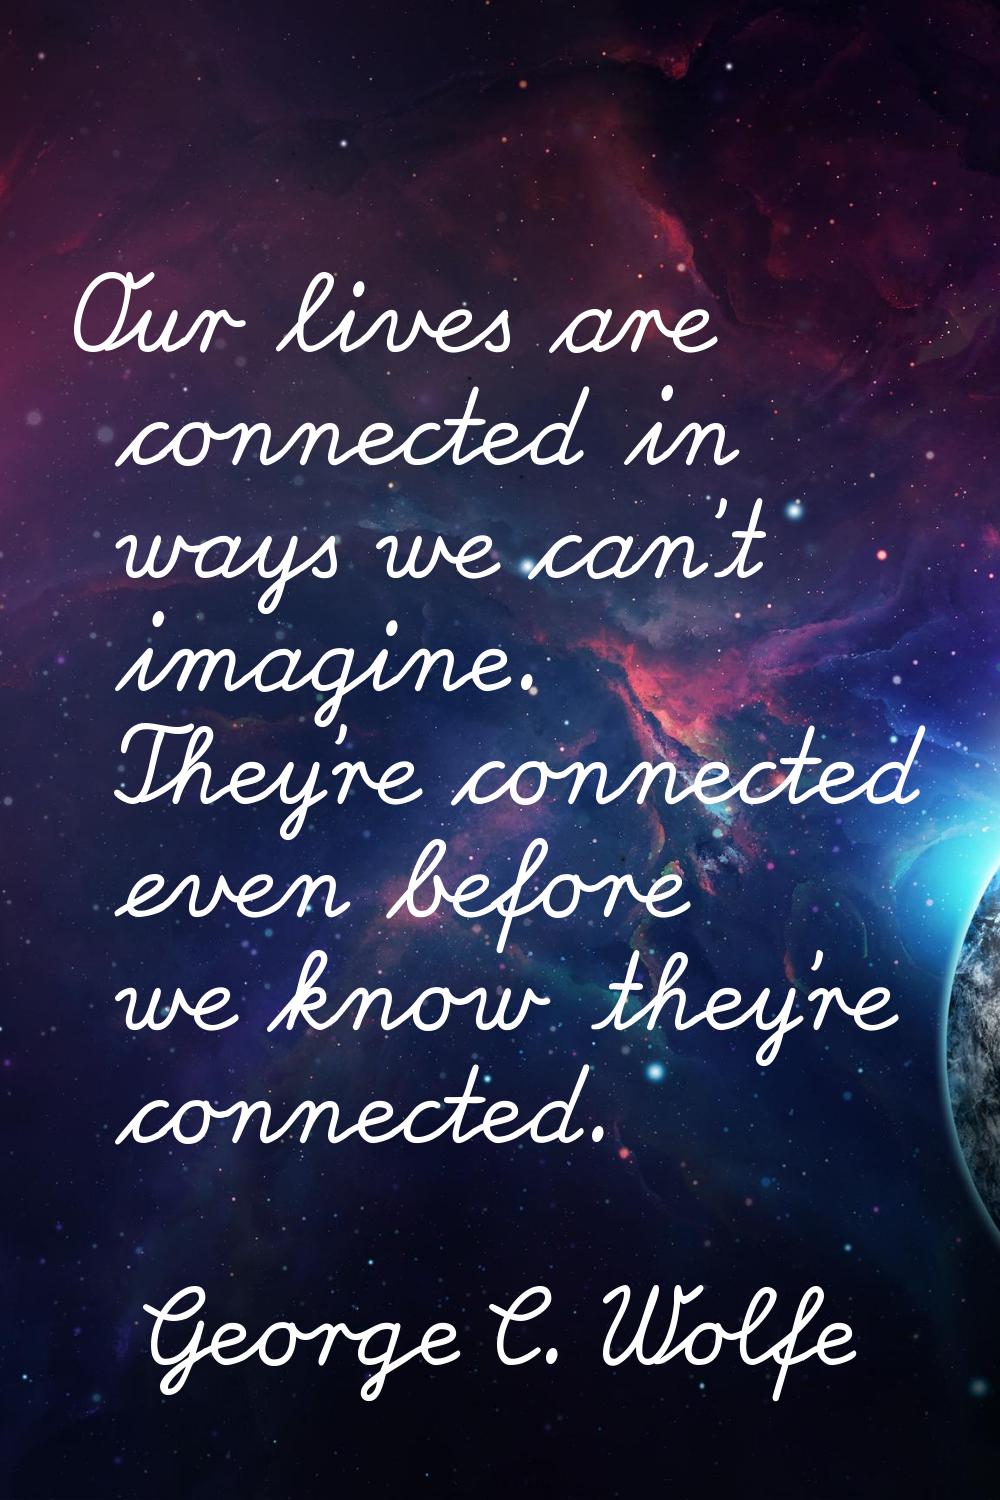 Our lives are connected in ways we can't imagine. They're connected even before we know they're con